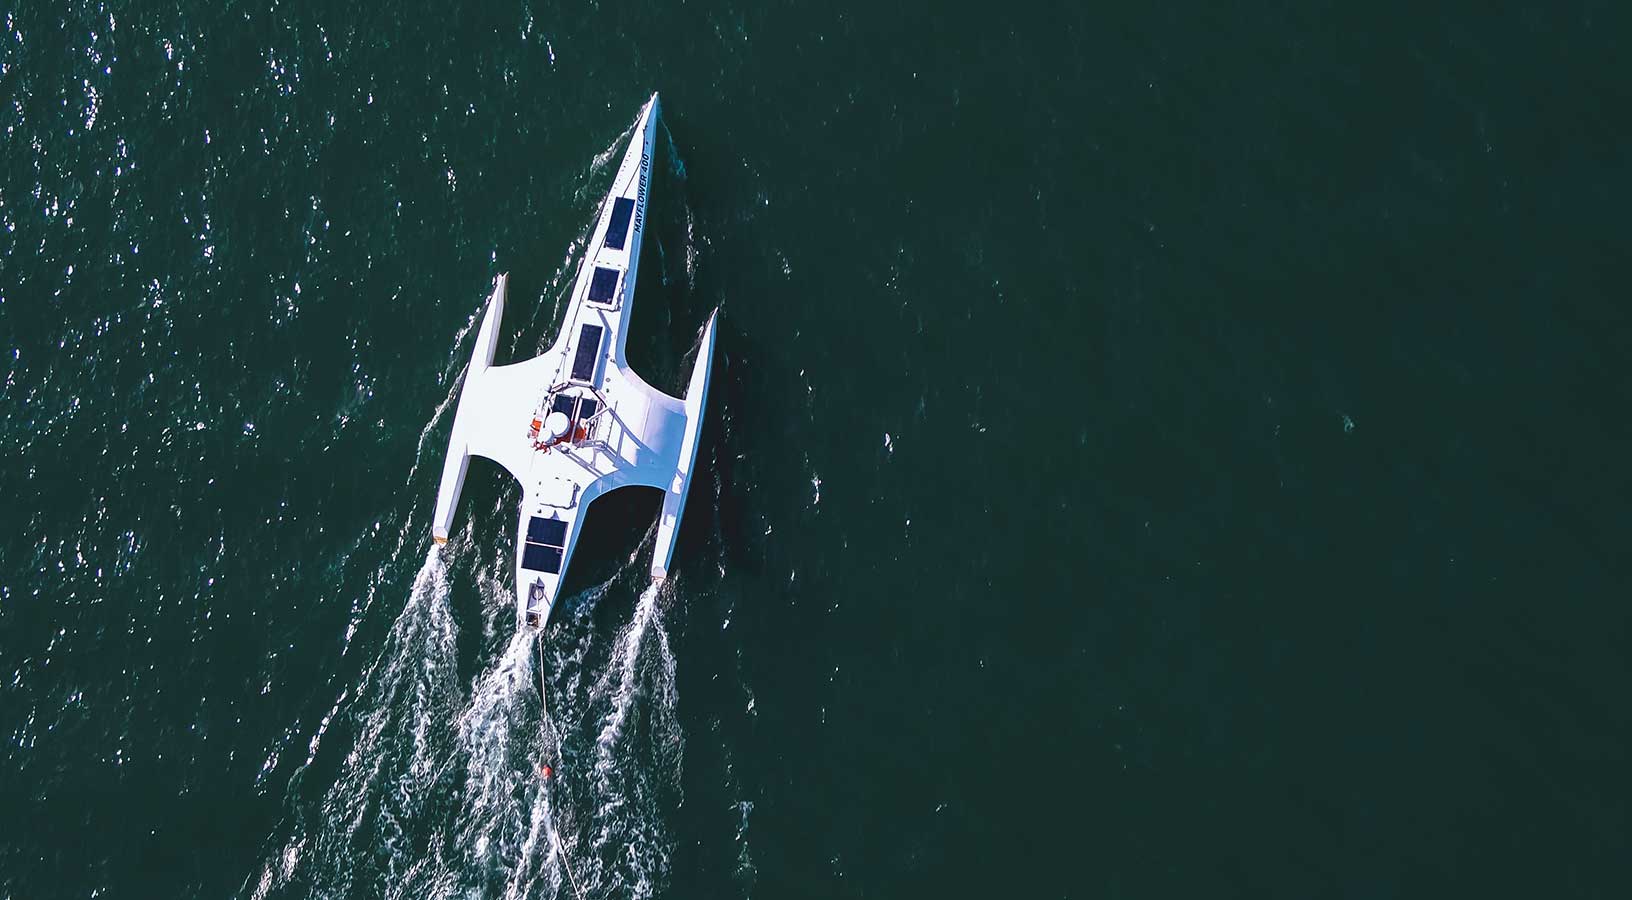 The Mayflower Autonomous Ship research vessel is shown from an aerial view during its sea trials.